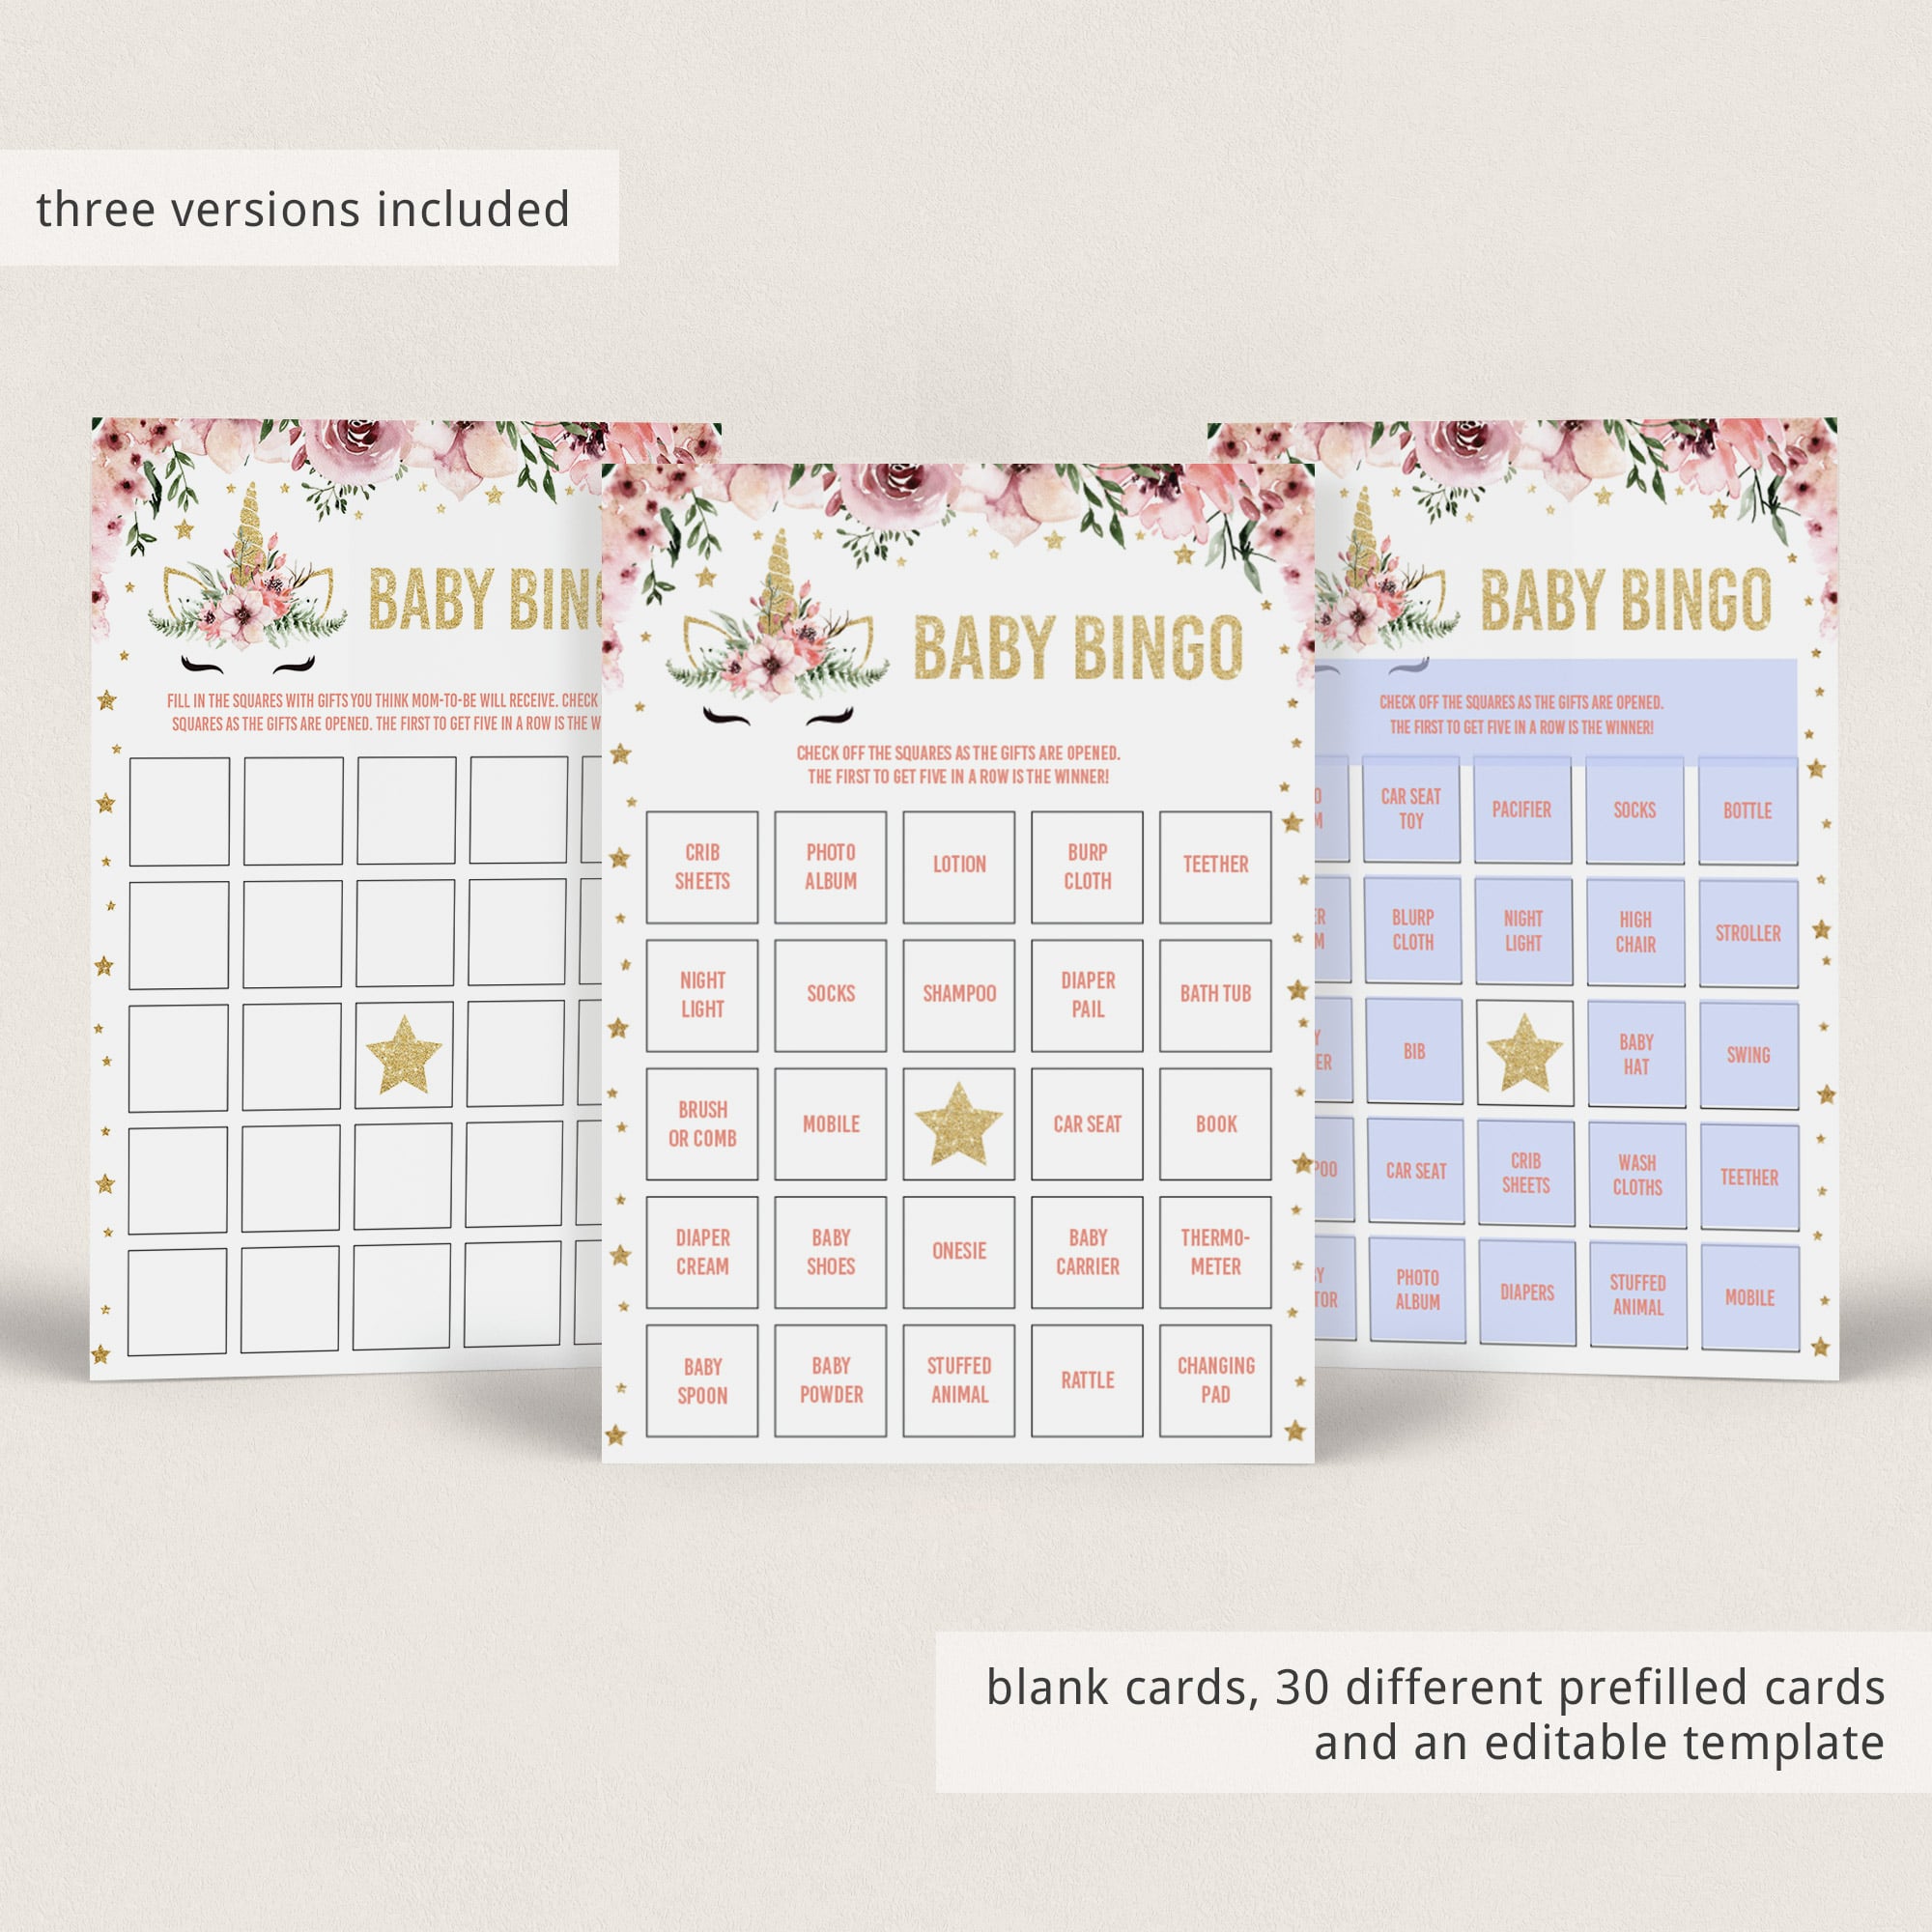 Printable baby shower bingo cards prefilled and blank cards by LittleSizzle